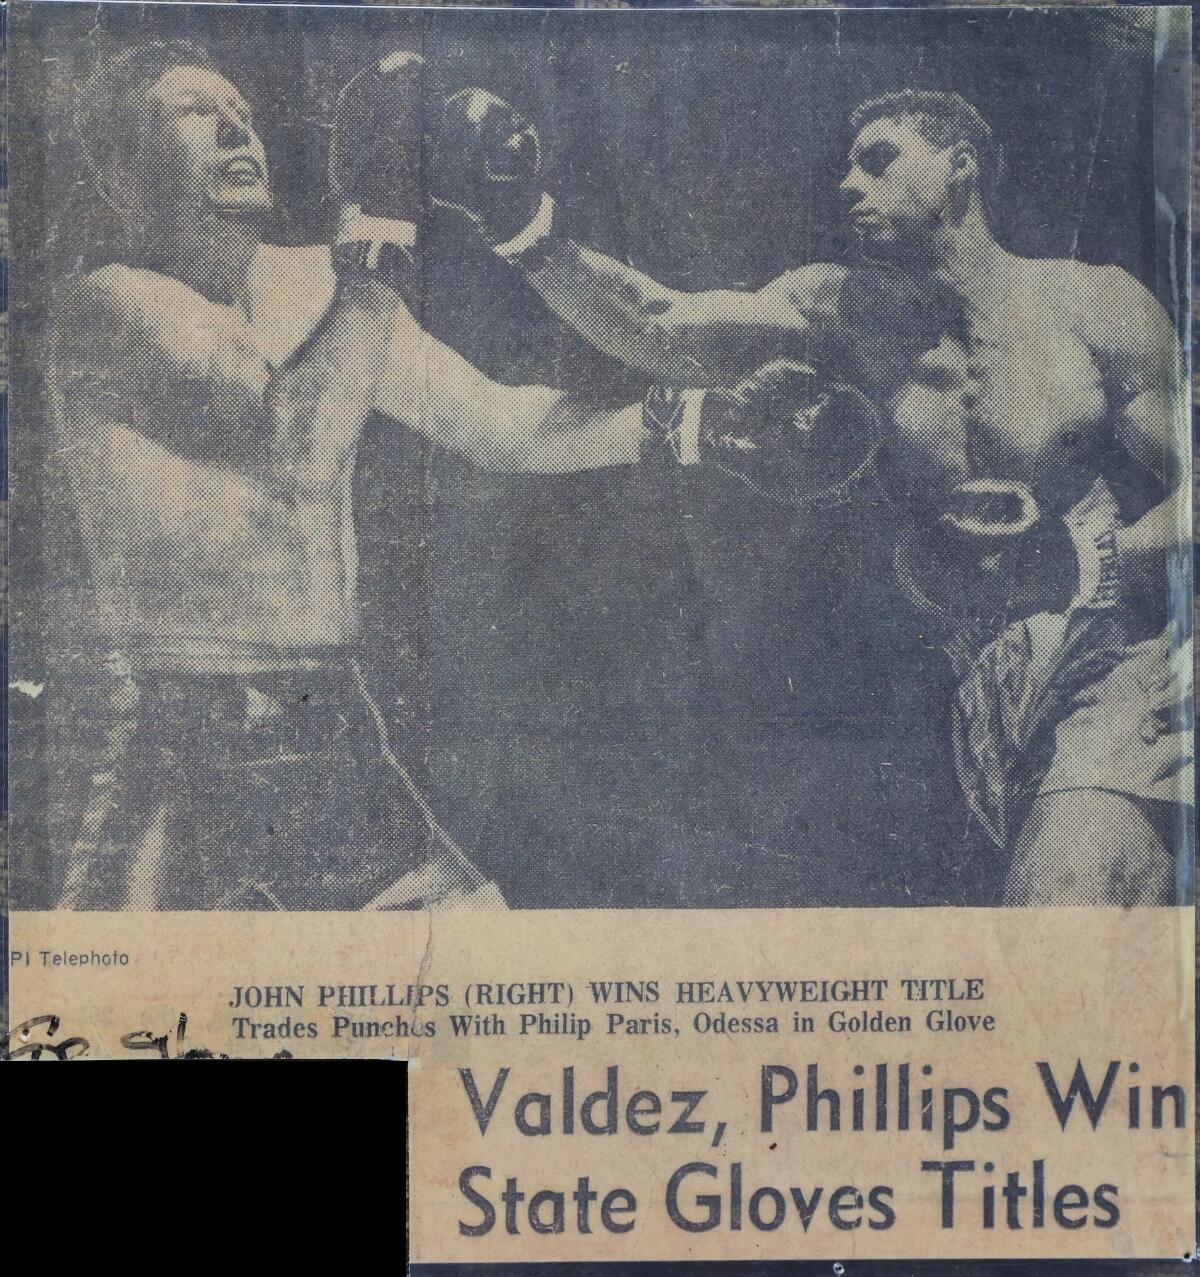 A 1964 newspaper clipping shows Houston heavyweight John Phillips, right, winning the Texas Golden Gloves state championship 